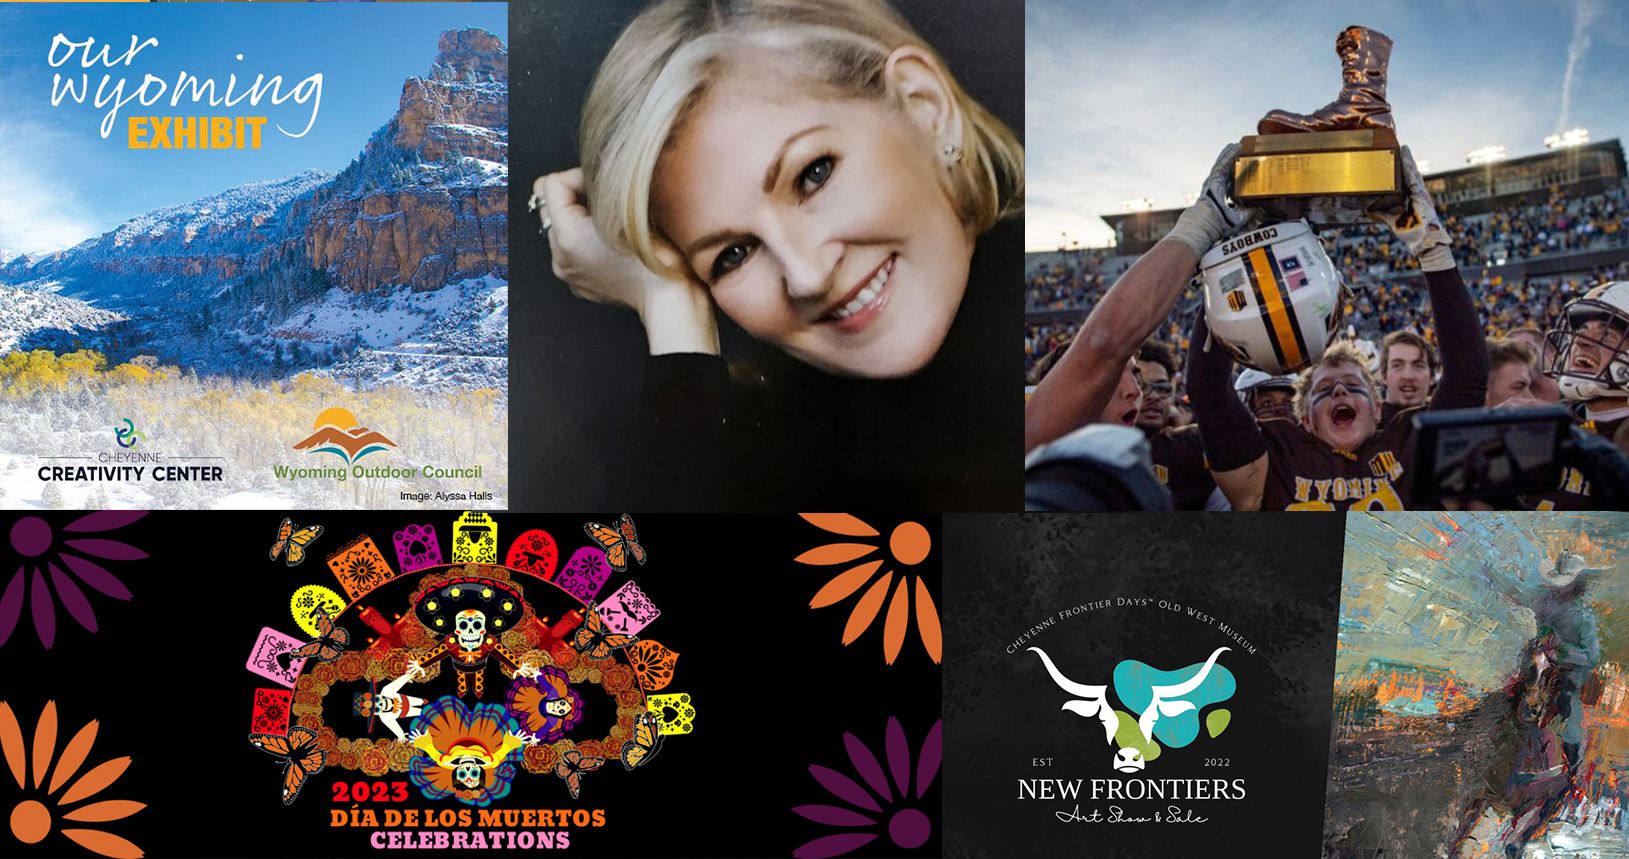 Border War, New Frontiers Art Show, Cheyenne Art Walk, Dia de los Muertos and So Much More Happening This Weekend!